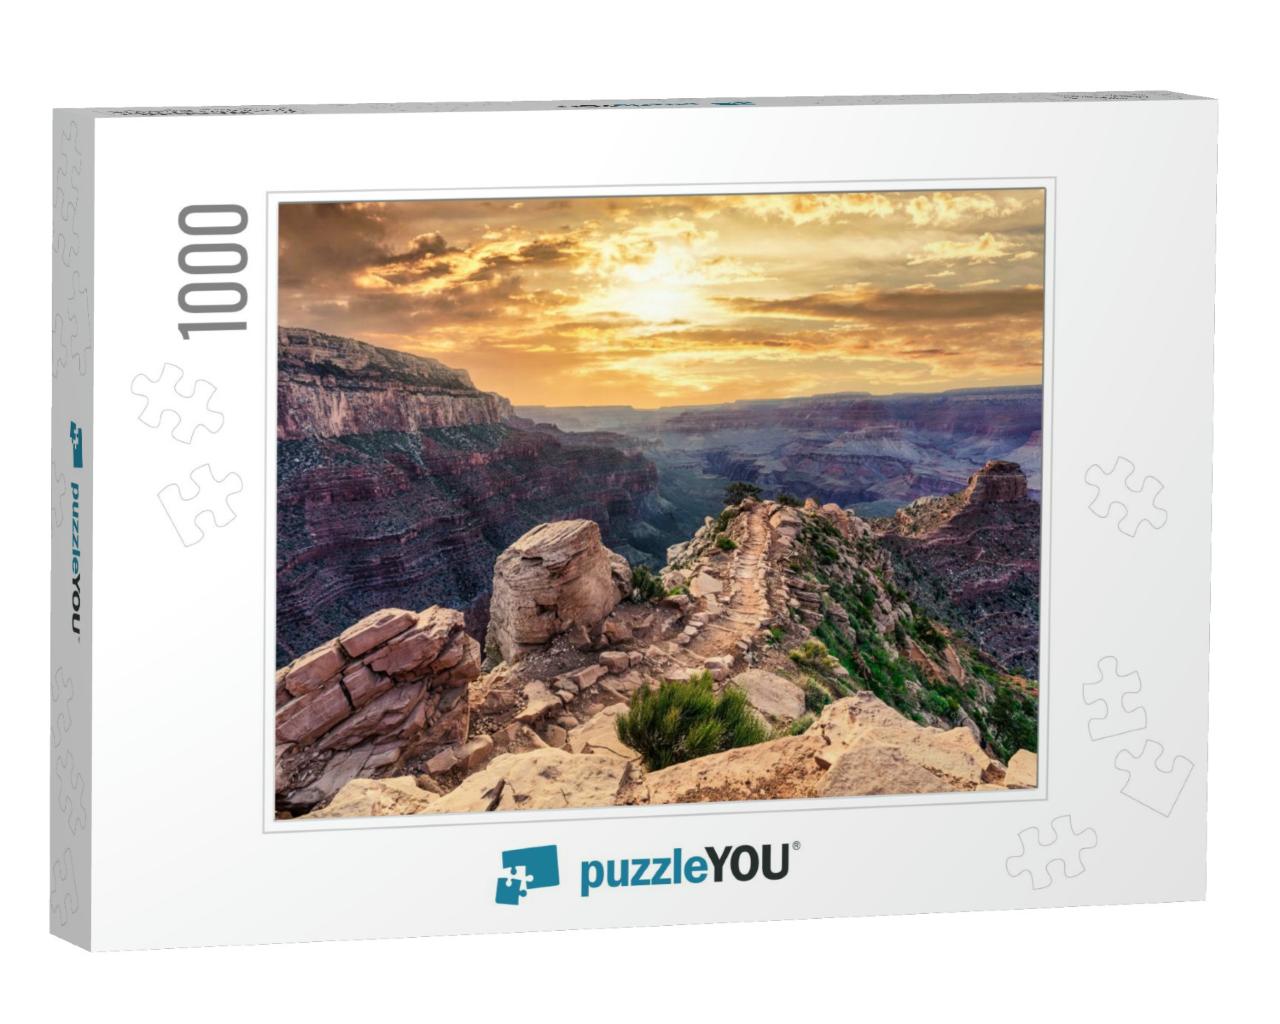 An Evening View Across Grand Canyon At Ooh Aah Point in A... Jigsaw Puzzle with 1000 pieces